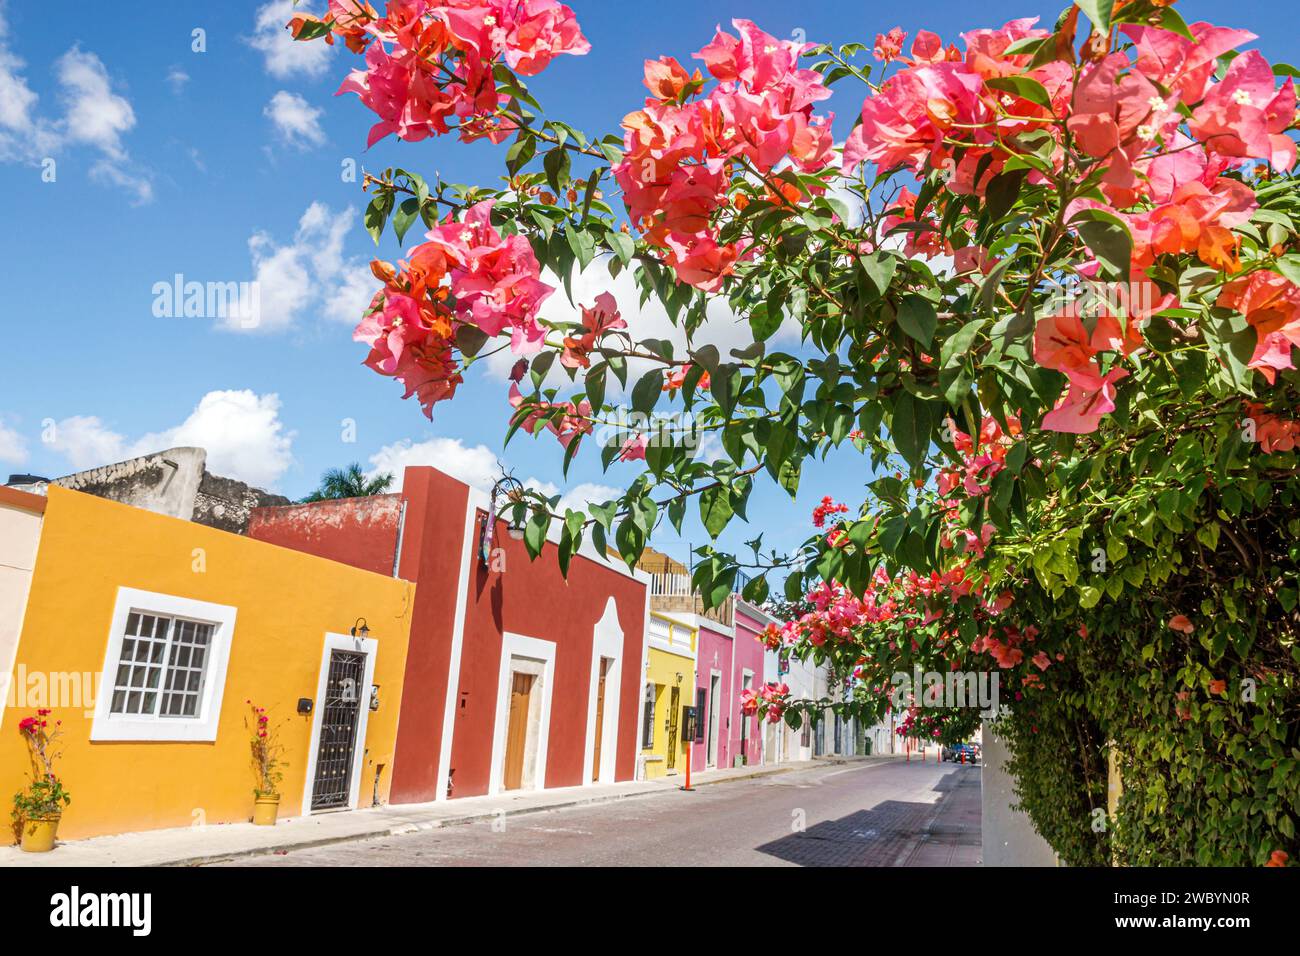 Merida Mexico,centro historico central historic district,Calle 64A,residence homes residences preservation,architecture,colorful,blooming bougainville Stock Photo